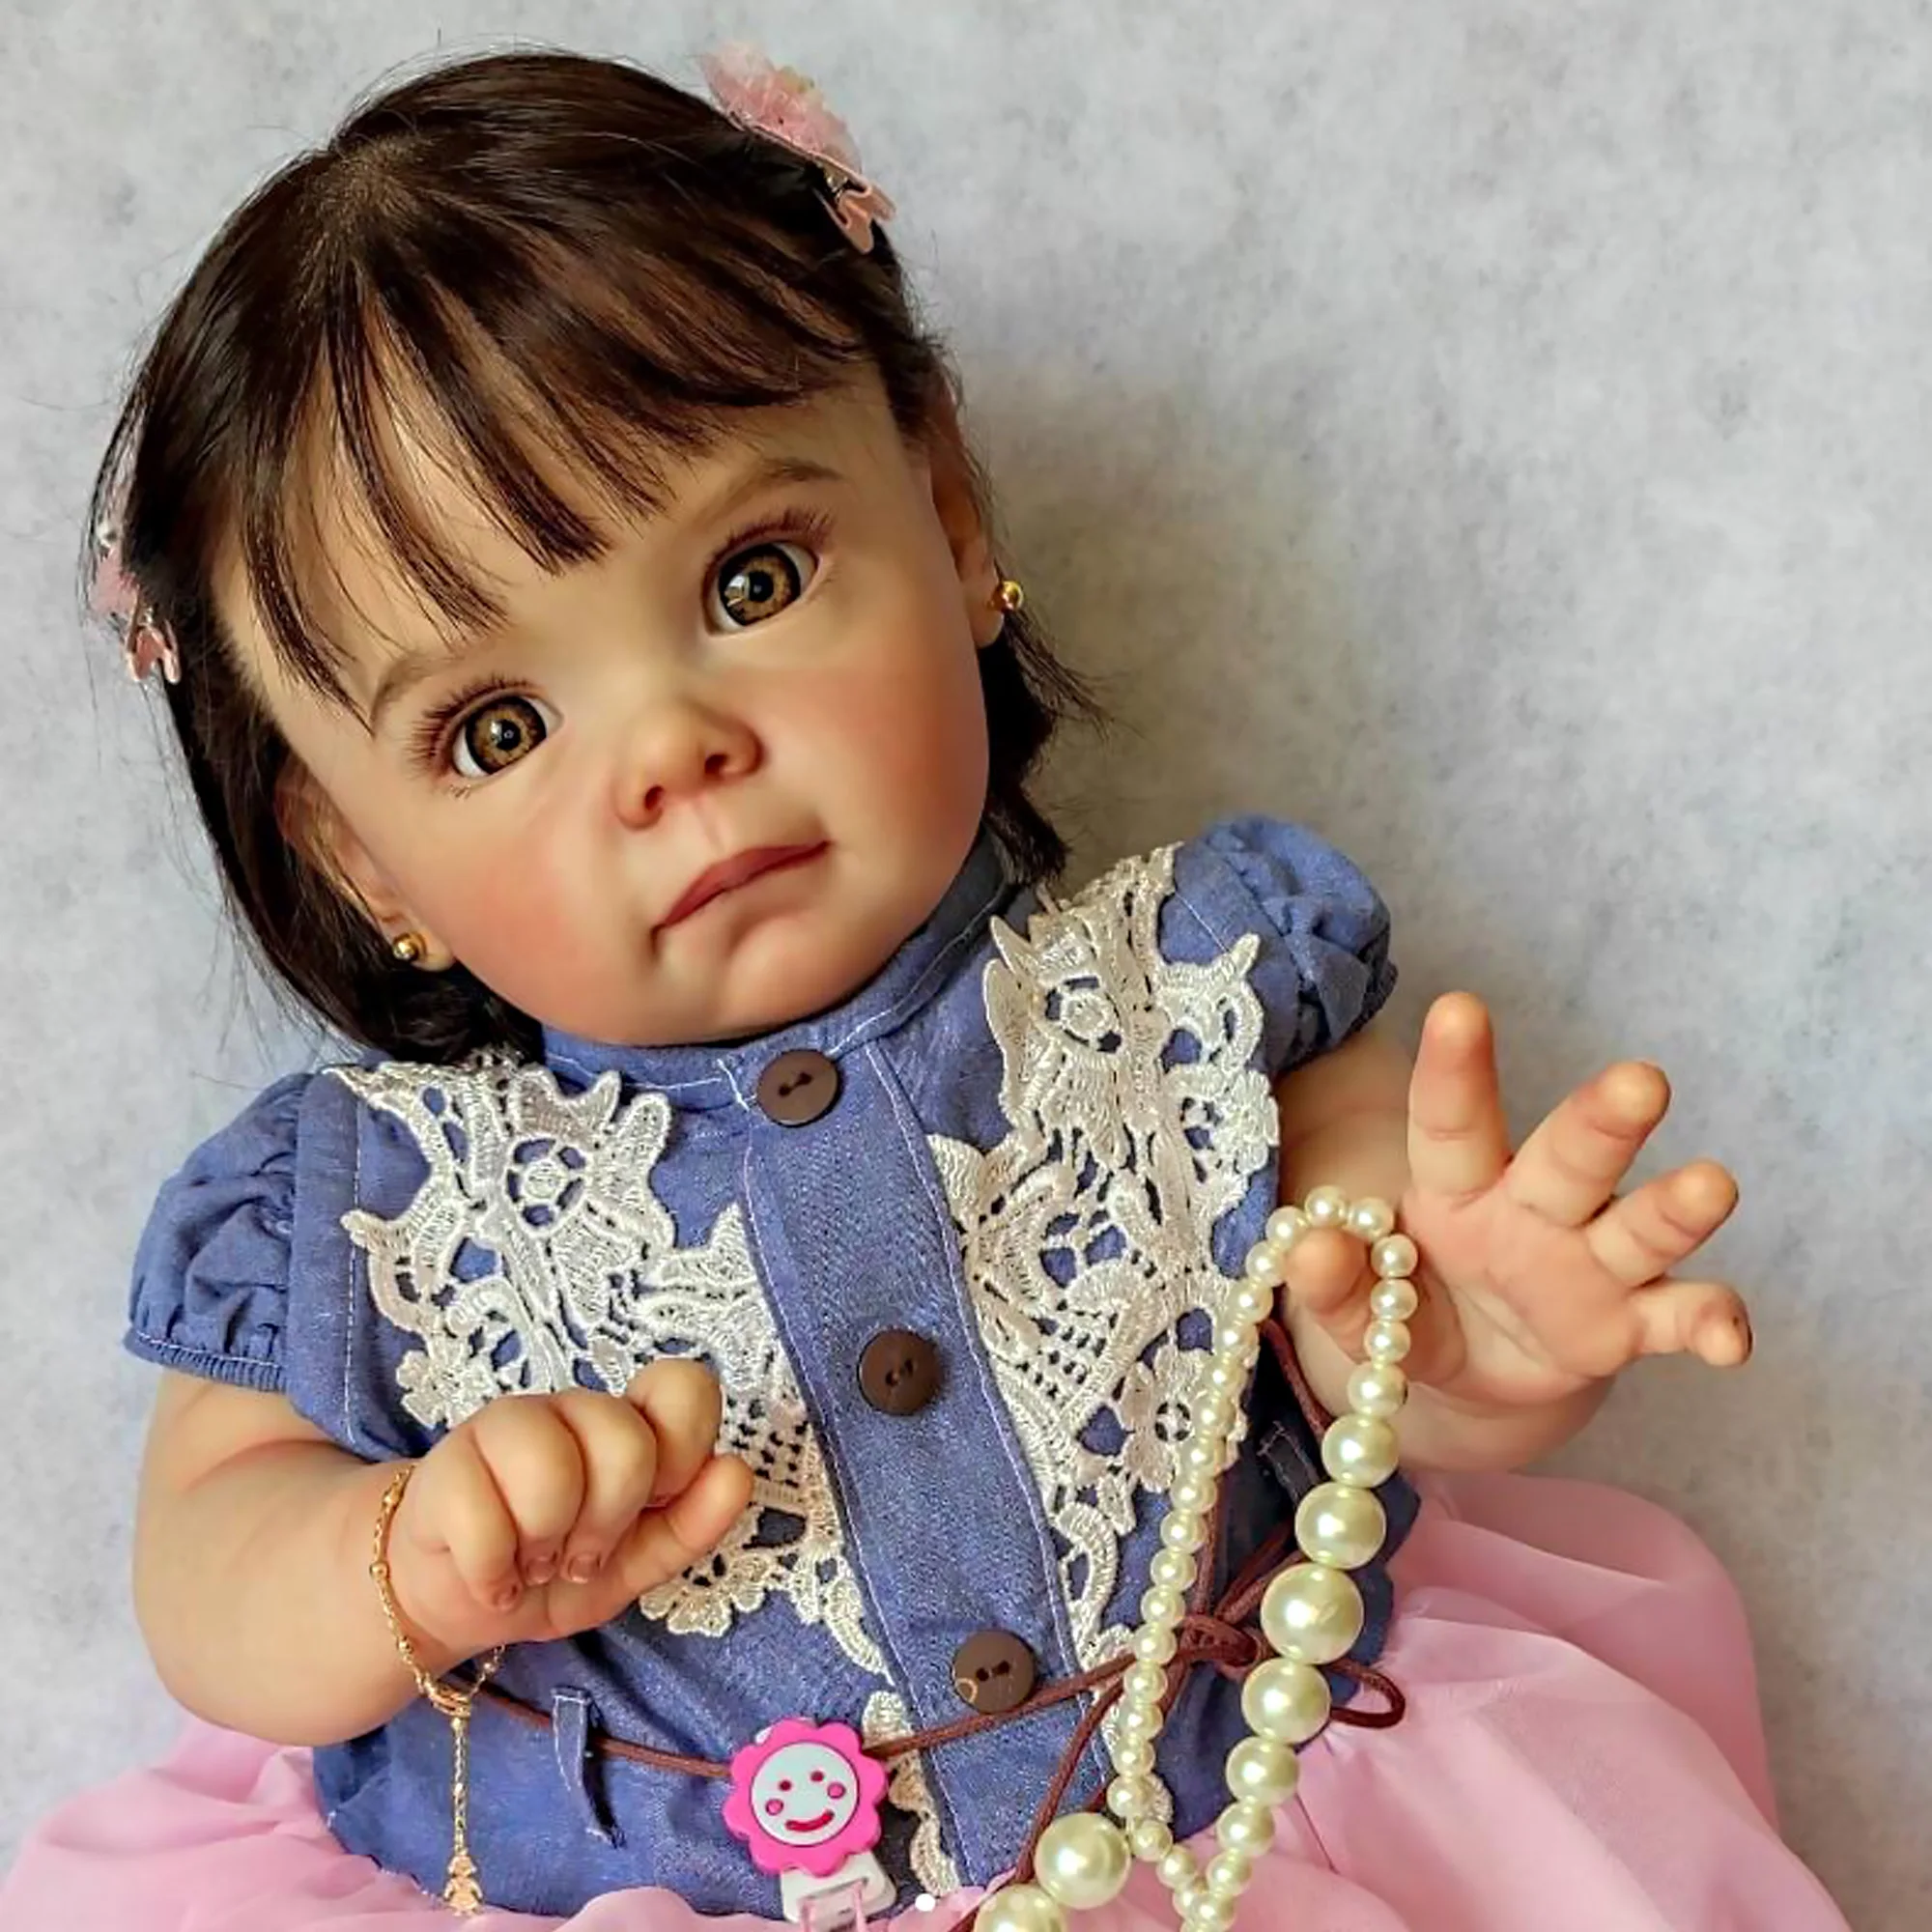 

Finished Doll Maggie 22 Inch Bebé Reborn Doll Hand Made Painted Realistic Baby Doll With Rooted Hair Doll Toys Muñeca Para Niña